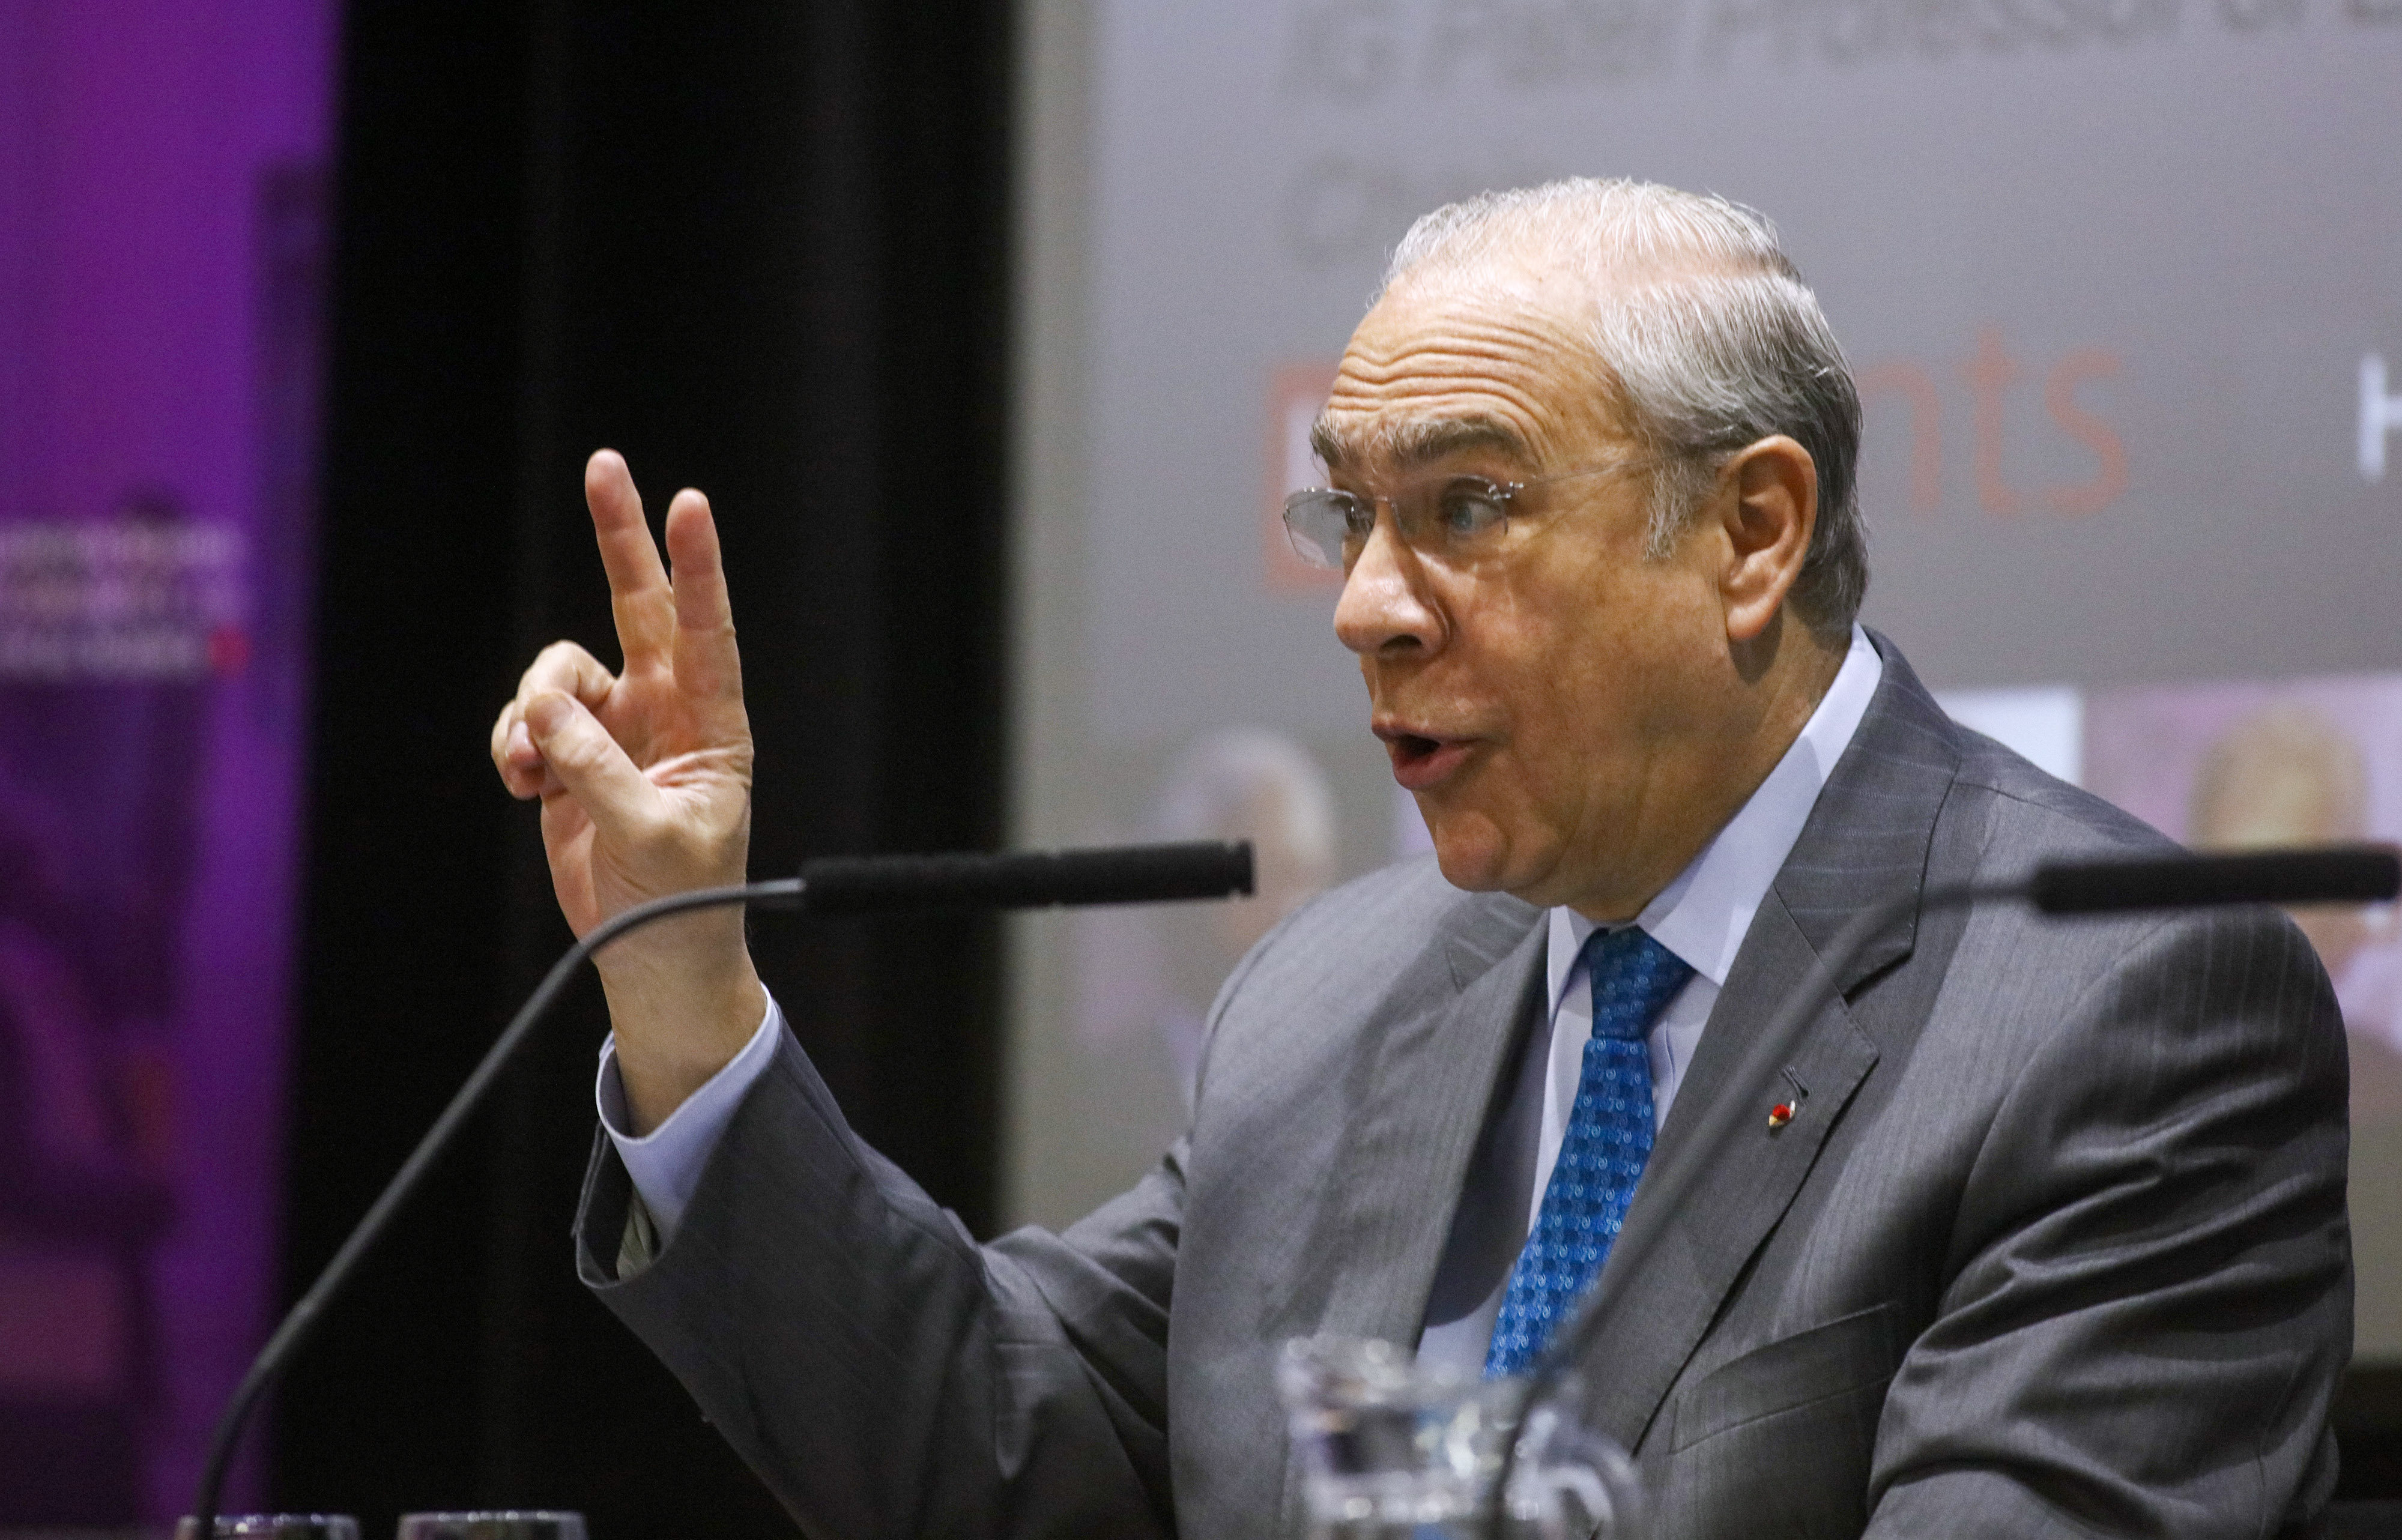 OECD Secretary General Jose Angel Gurria Delivers Brexit Lecture